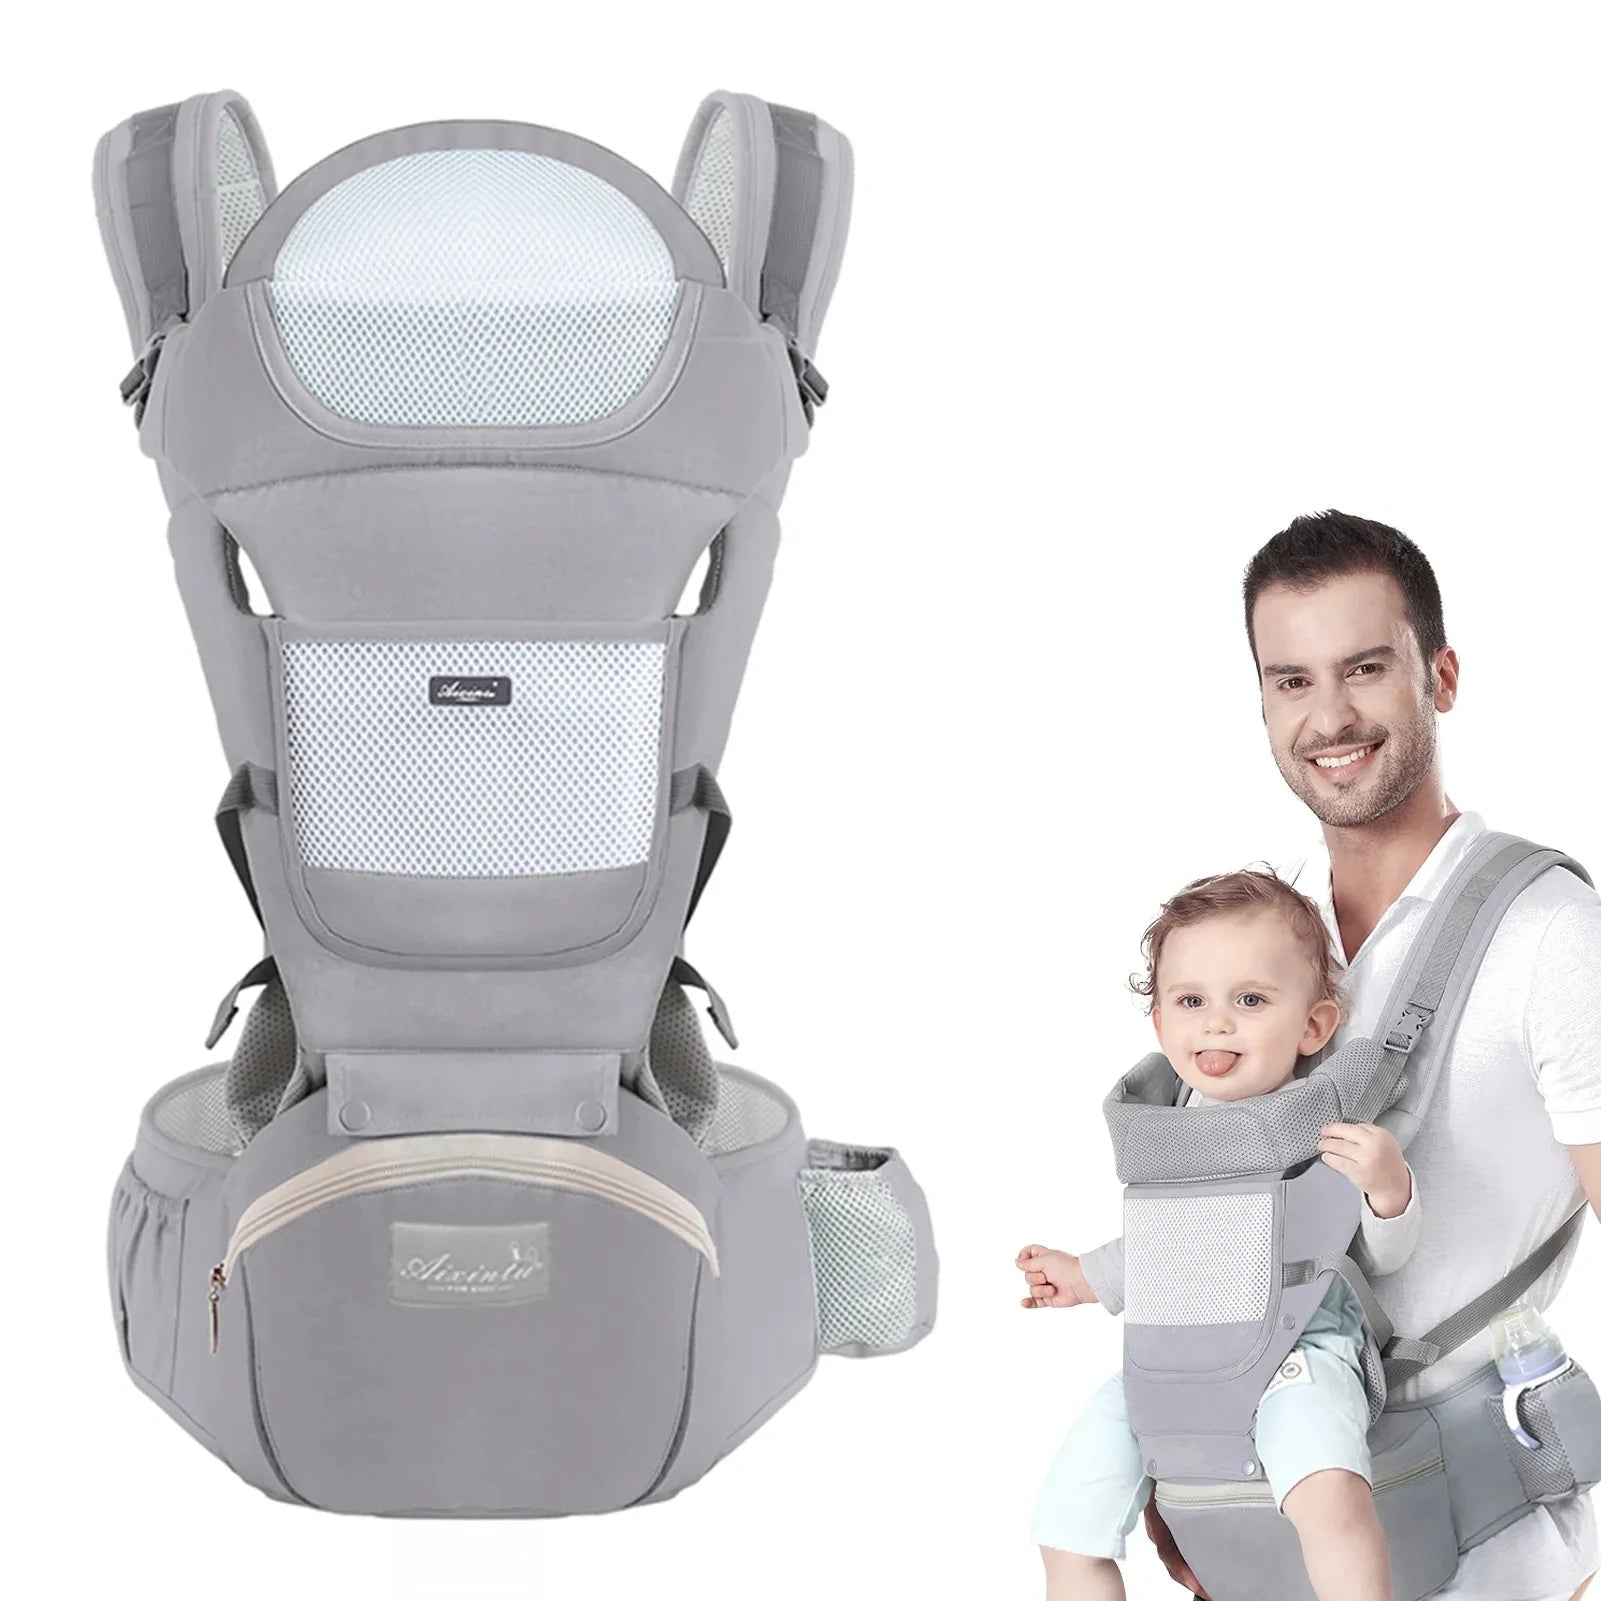 Adjustable Fabric Baby Carrier